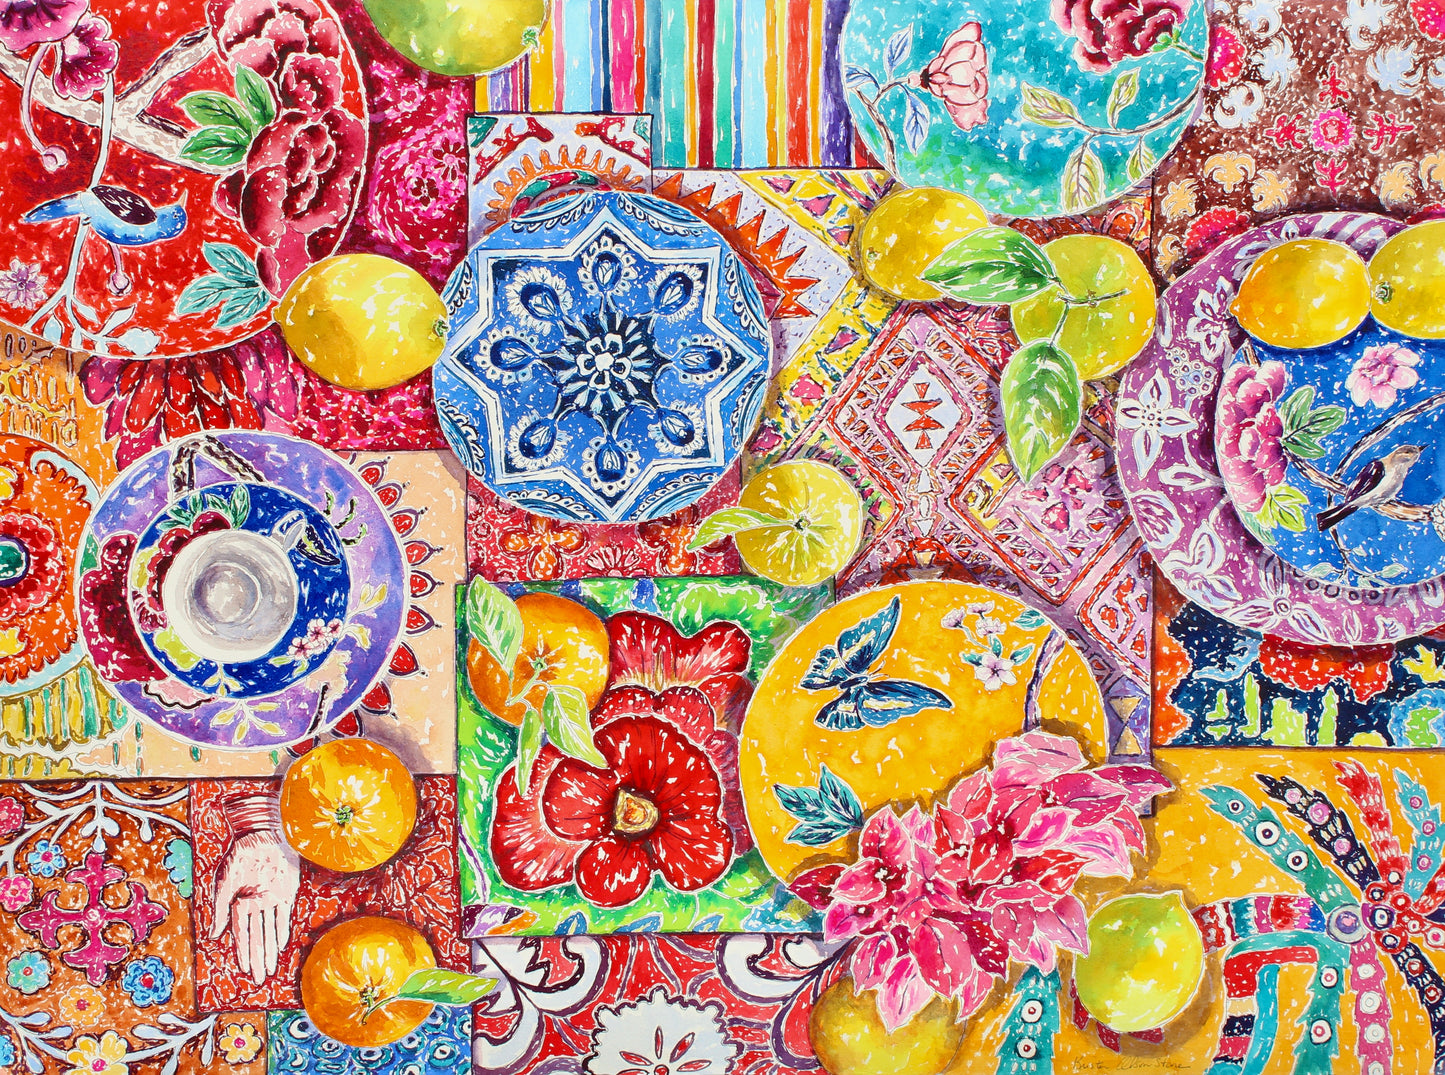 Brunch In Barcelona, An Original 22" x 30" Highly Detailed Watercolor And Ink Painting Of A Maximalist Table Setting